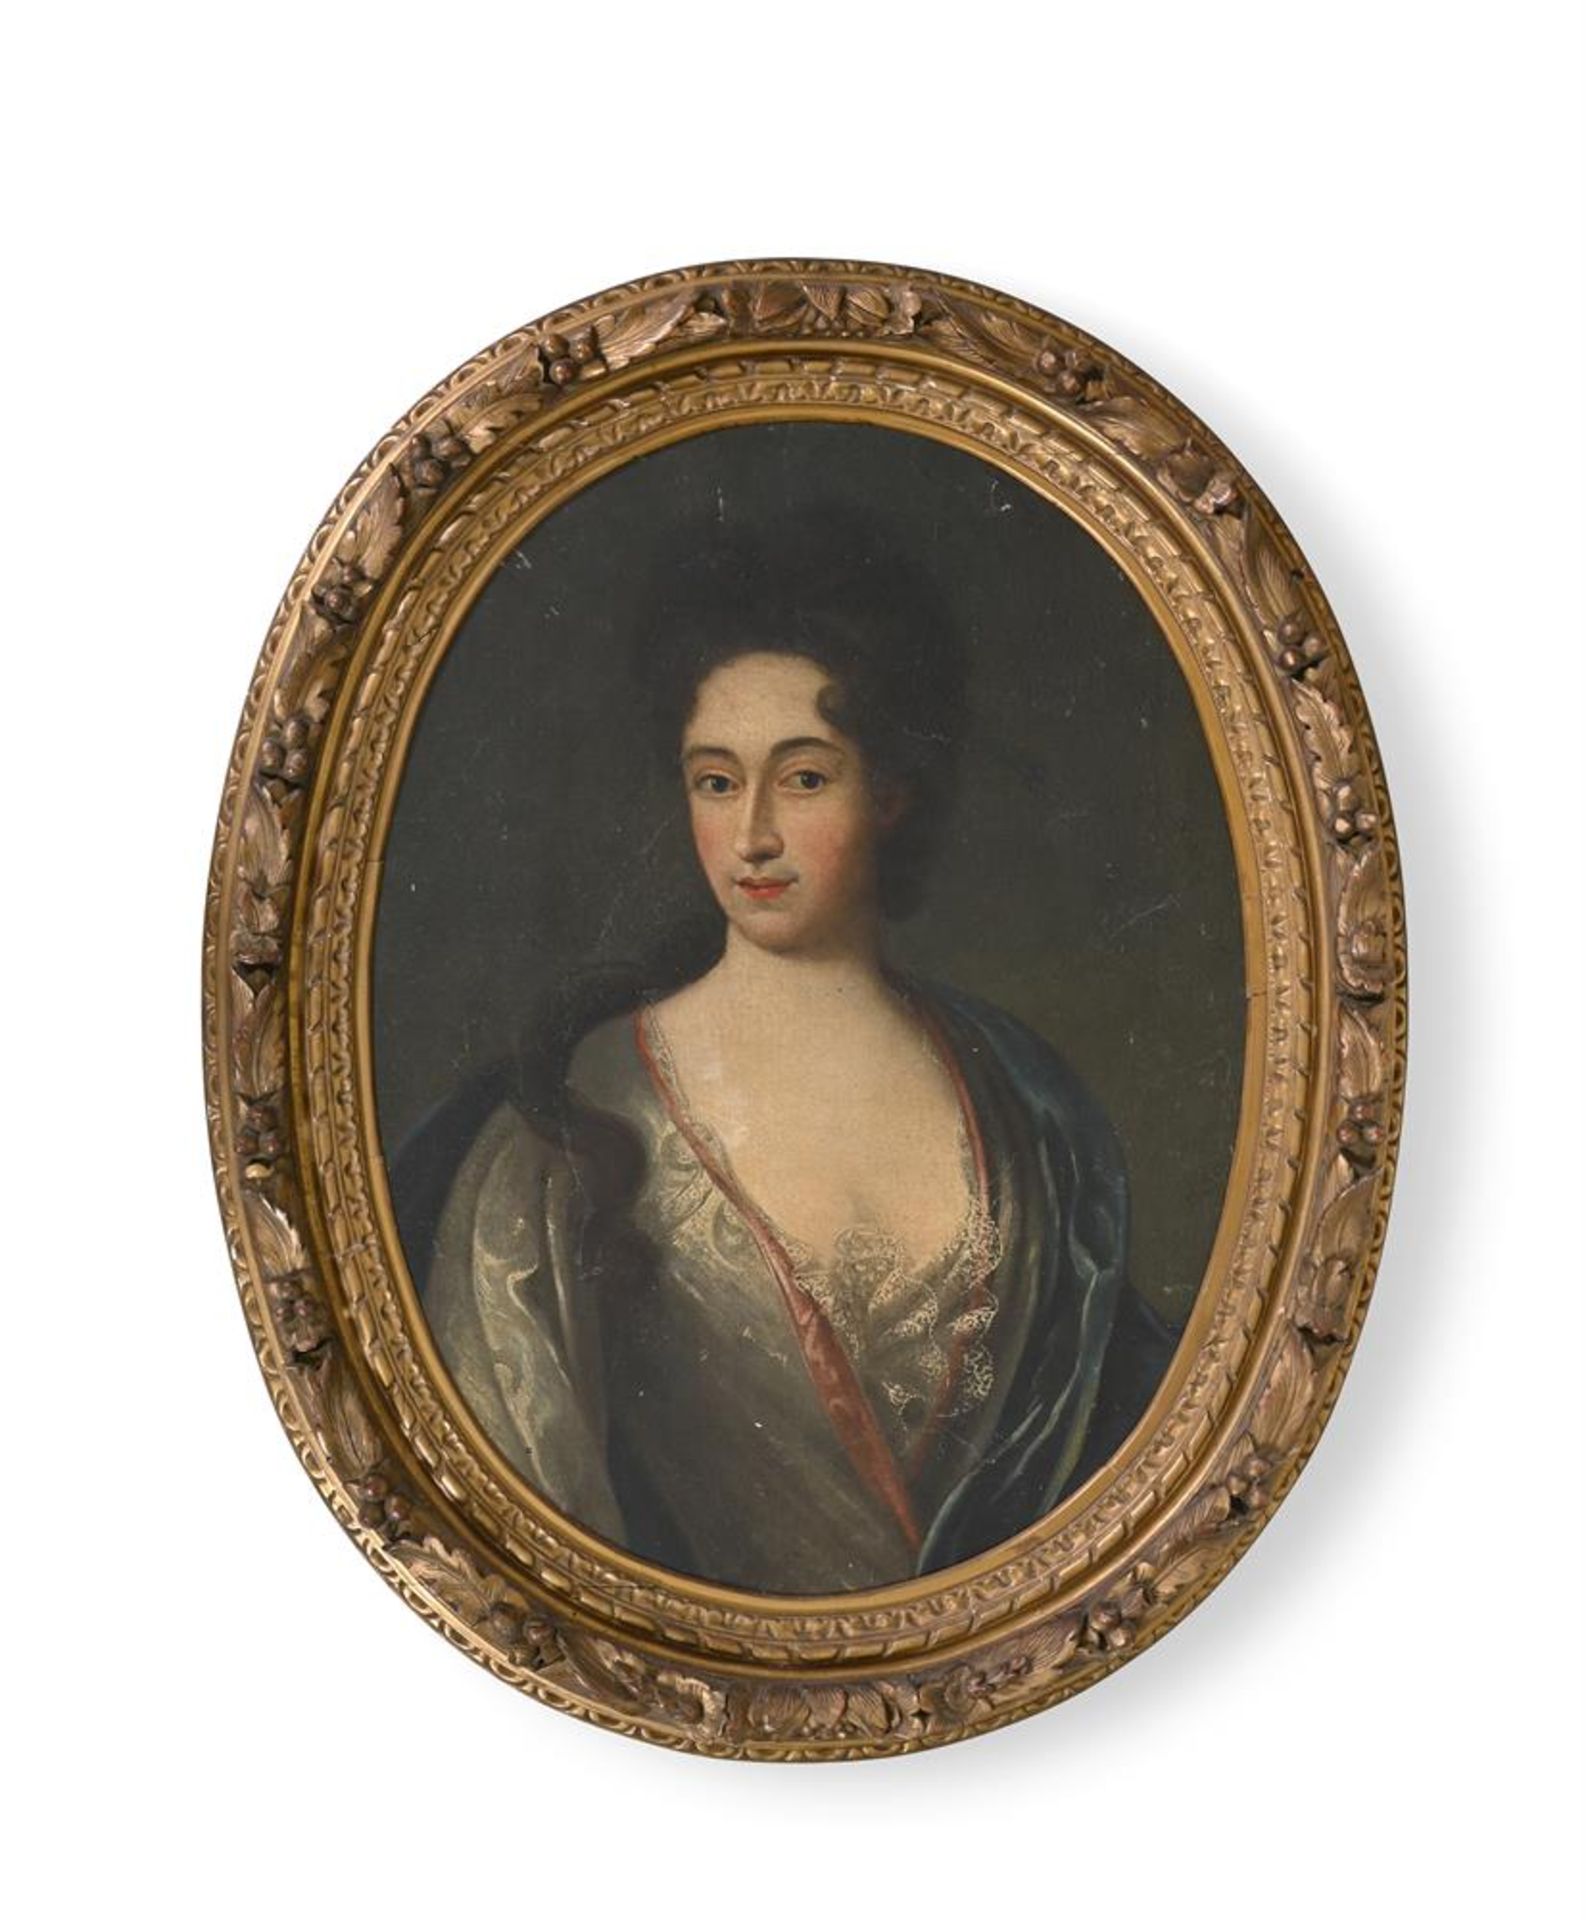 ENGLISH SCHOOL (EARLY 18TH CENTURY), PORTRAIT OF A LADY, BUST LENGTH IN A BLUE DRESS